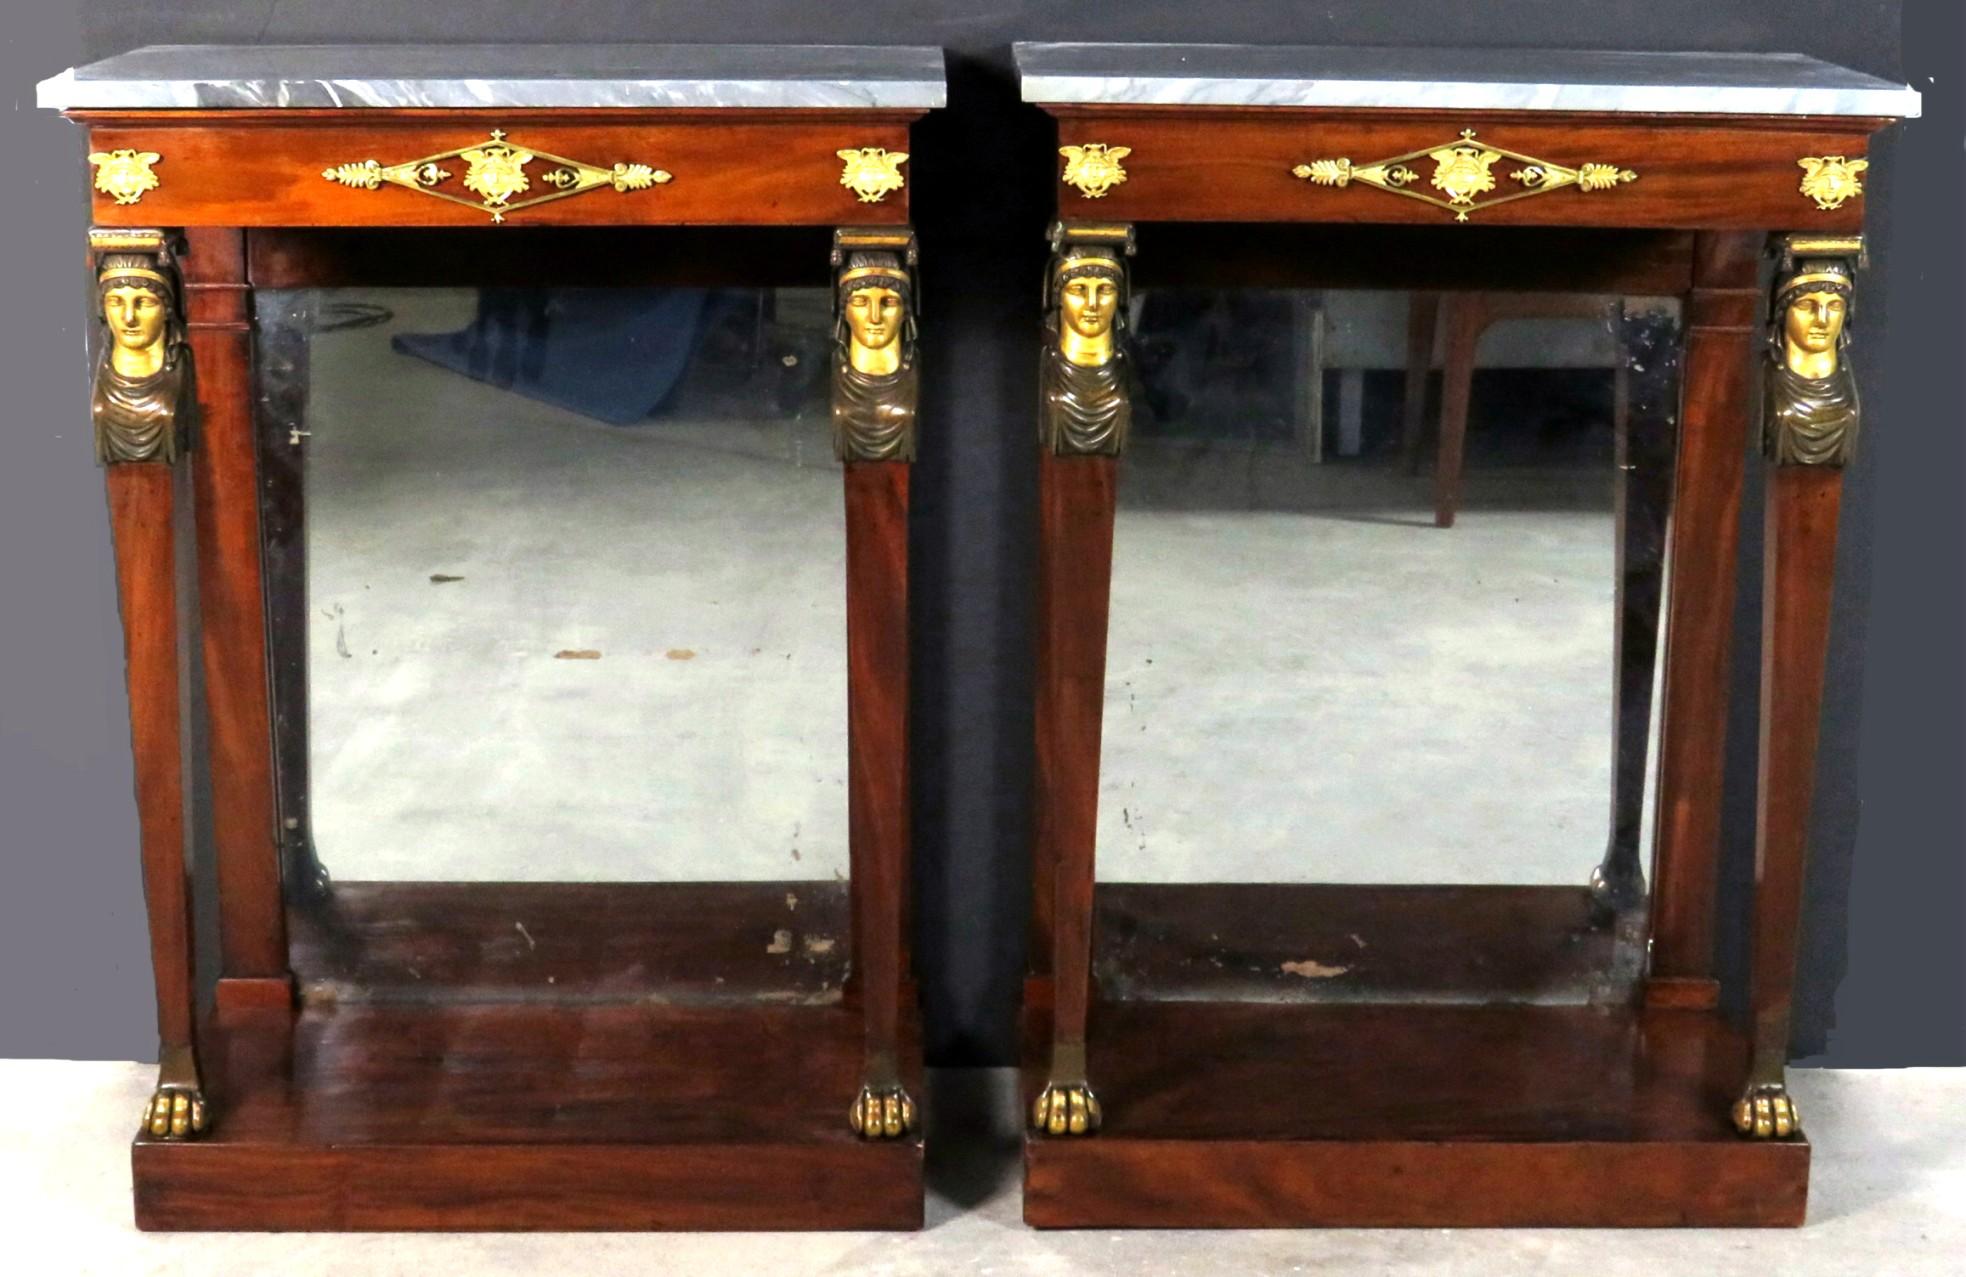 A very fine & diminutive pair of early 19th century French Empire period mahogany console / pier tables, showing later grey marble tops (one repaired) surmounting a flattened frieze decorated with finely chiselled gilt bronze mounts, raised on